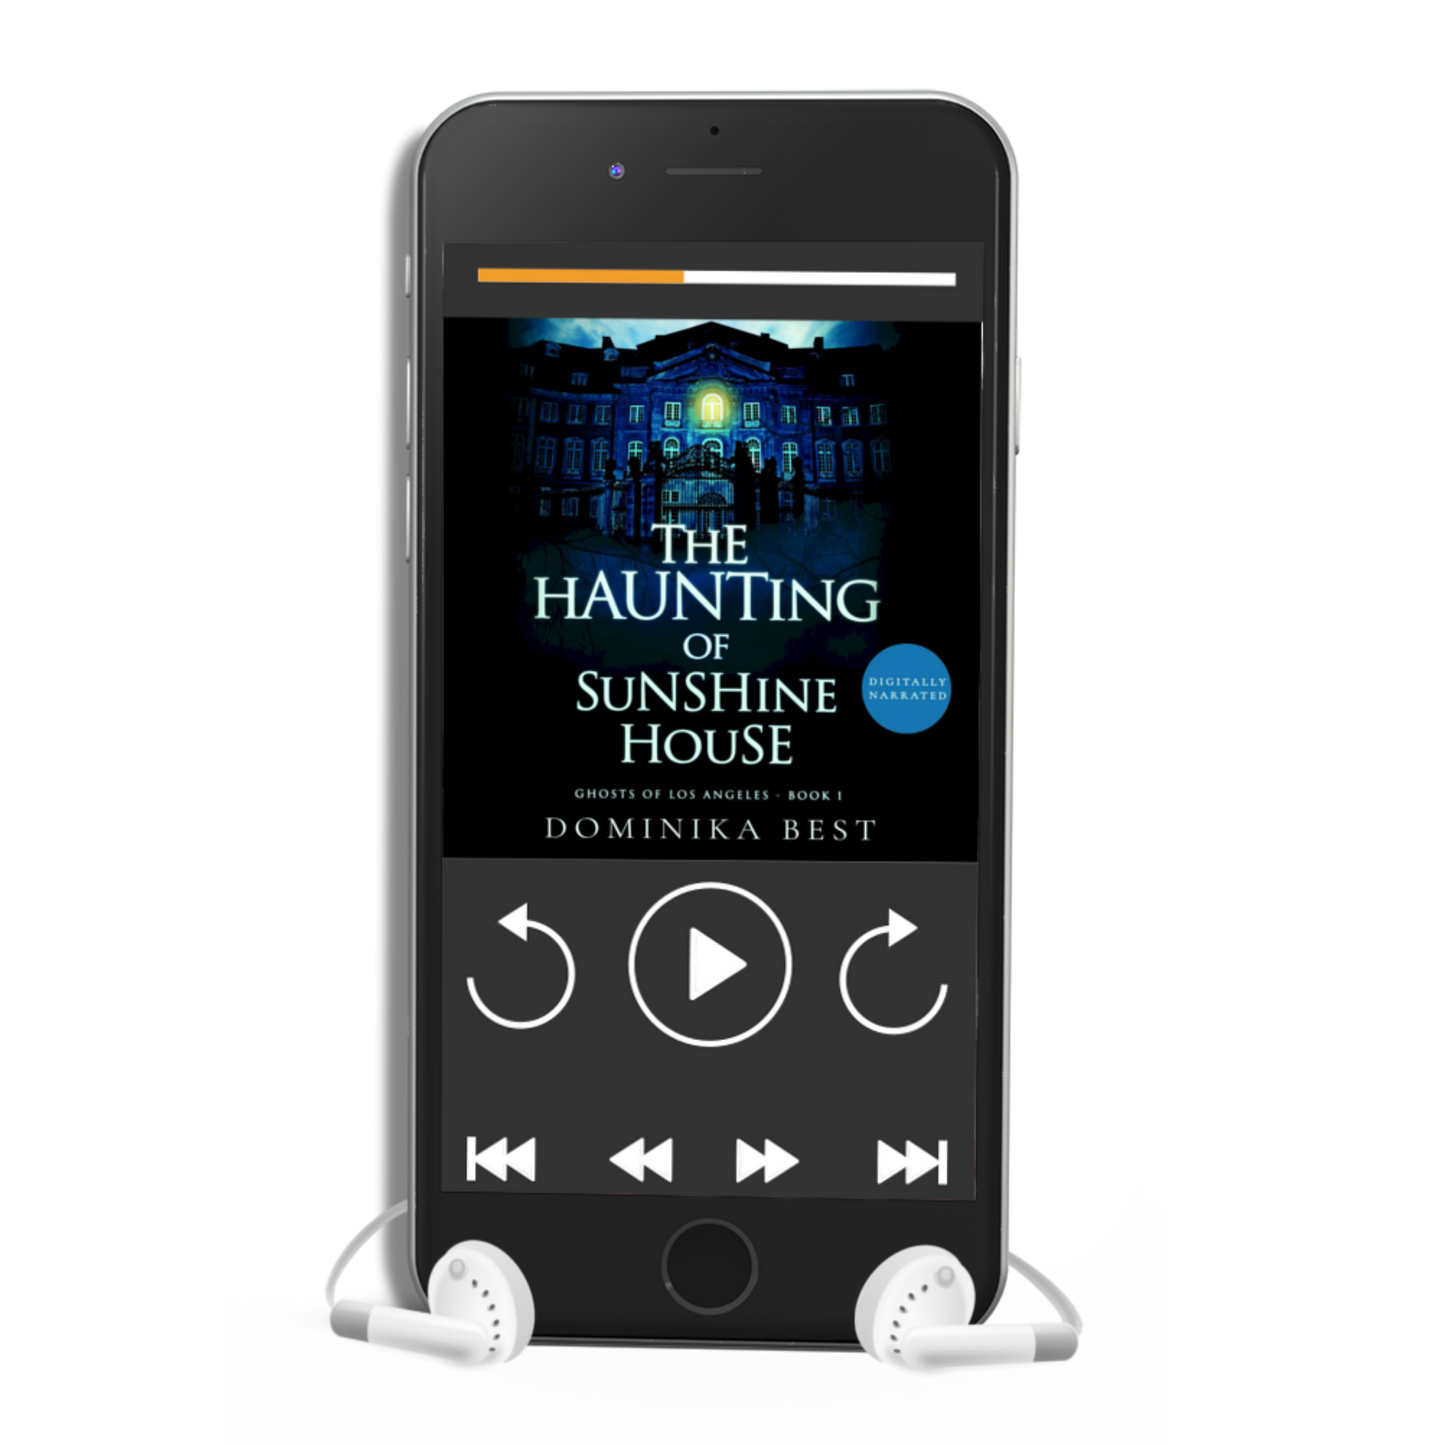 The Haunting of Sunshine House - Book 1, Ghosts of Los Angeles Series